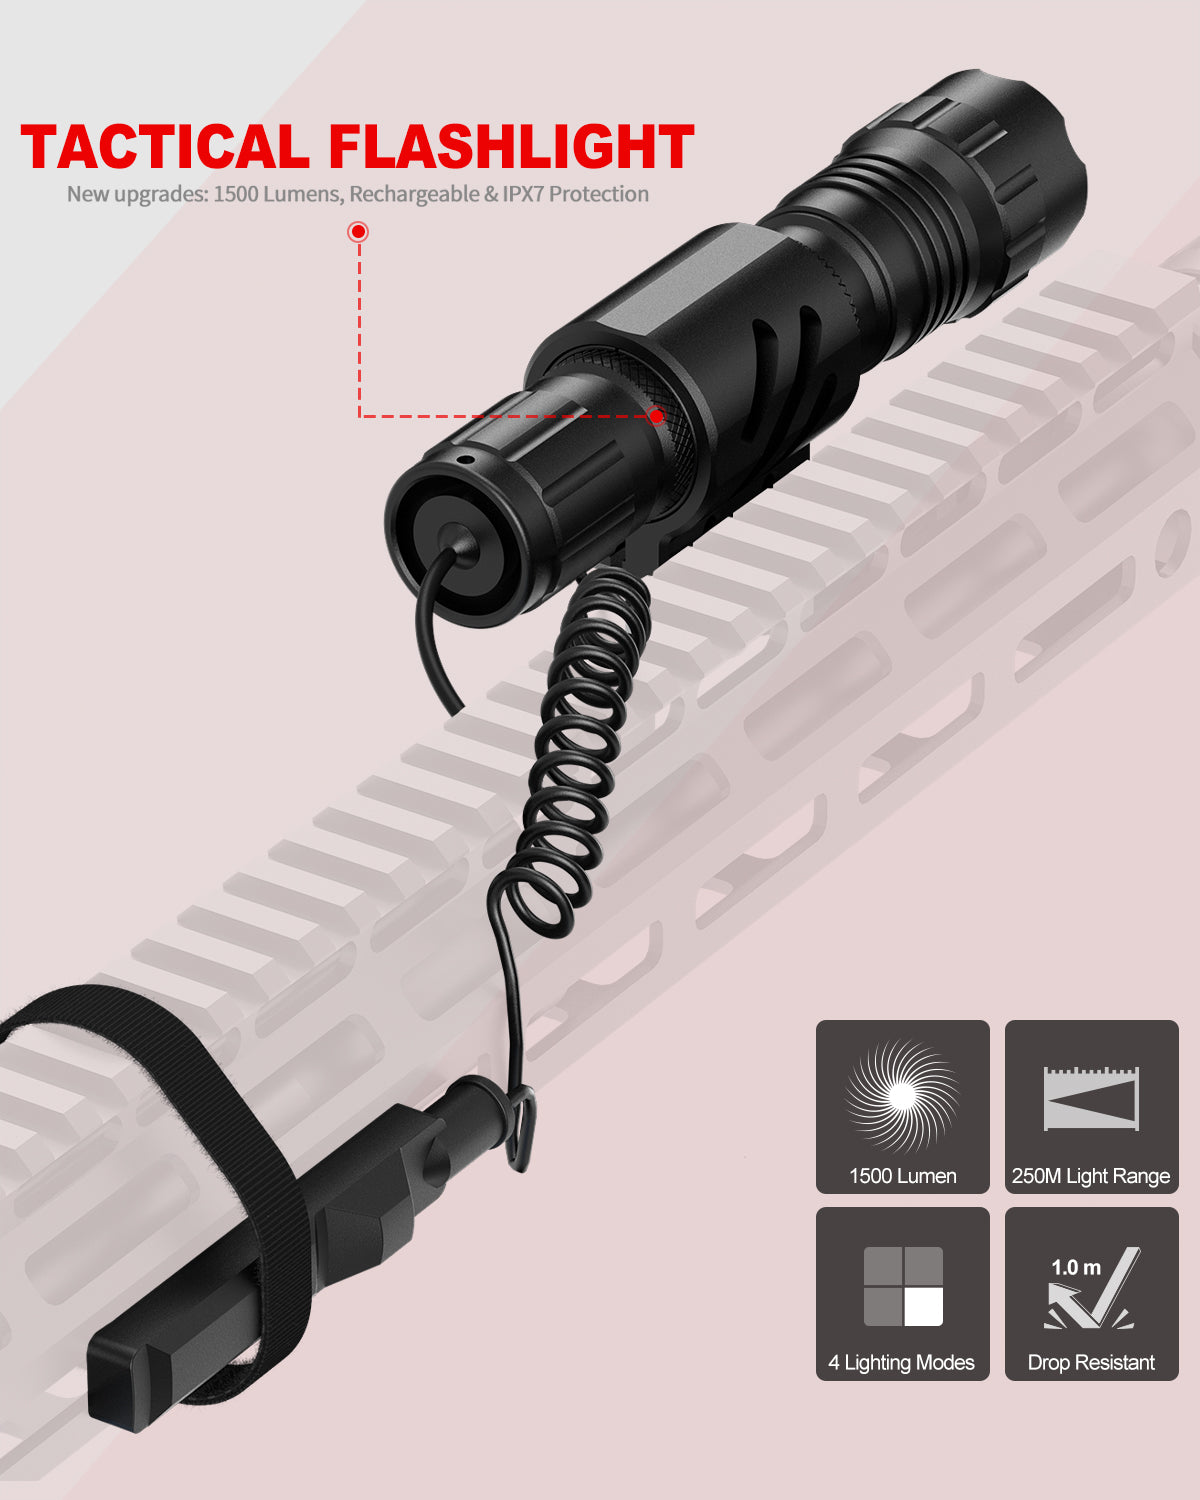 Feyachi Mlok 1500 Lumen Tactical Flashlight Rechargeable IPX7 Protection 4 Modes Weapon Light Mlok Mount Rail LED Flashlight Included with Pressure Switch